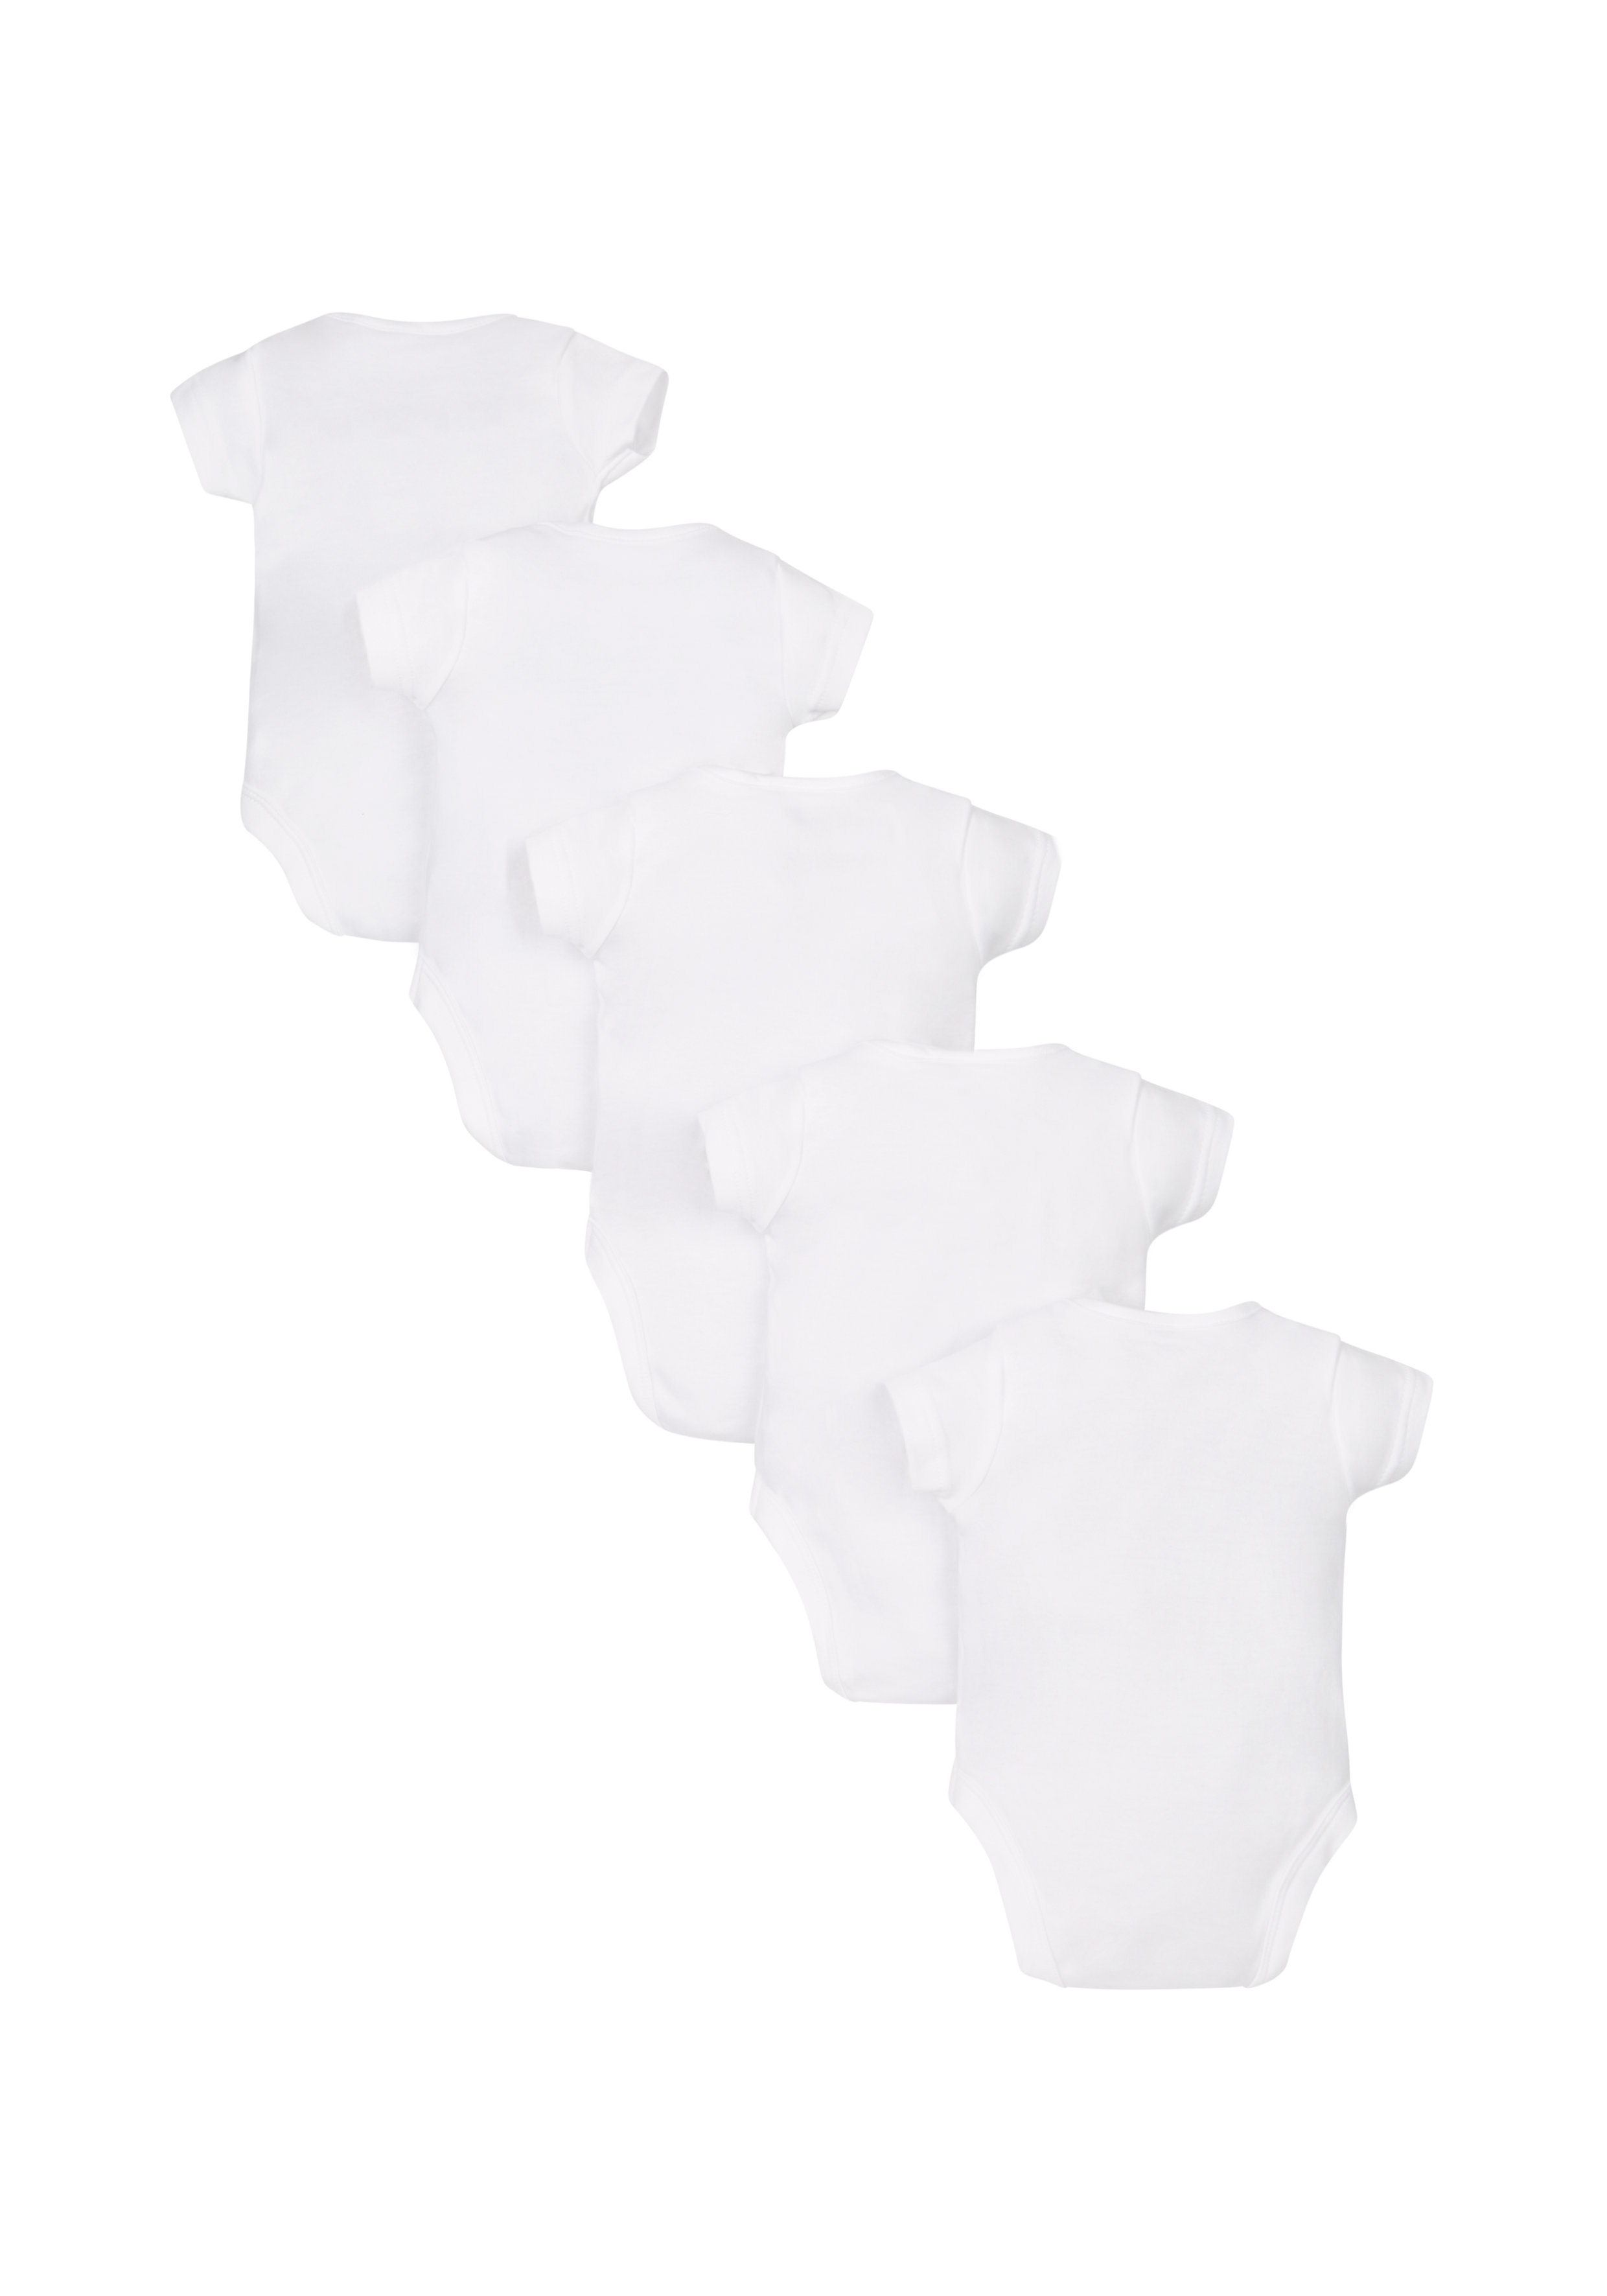 Mothercare | Unisex Half Sleeves Printed Bodysuits - Pack Of 5 - White 1